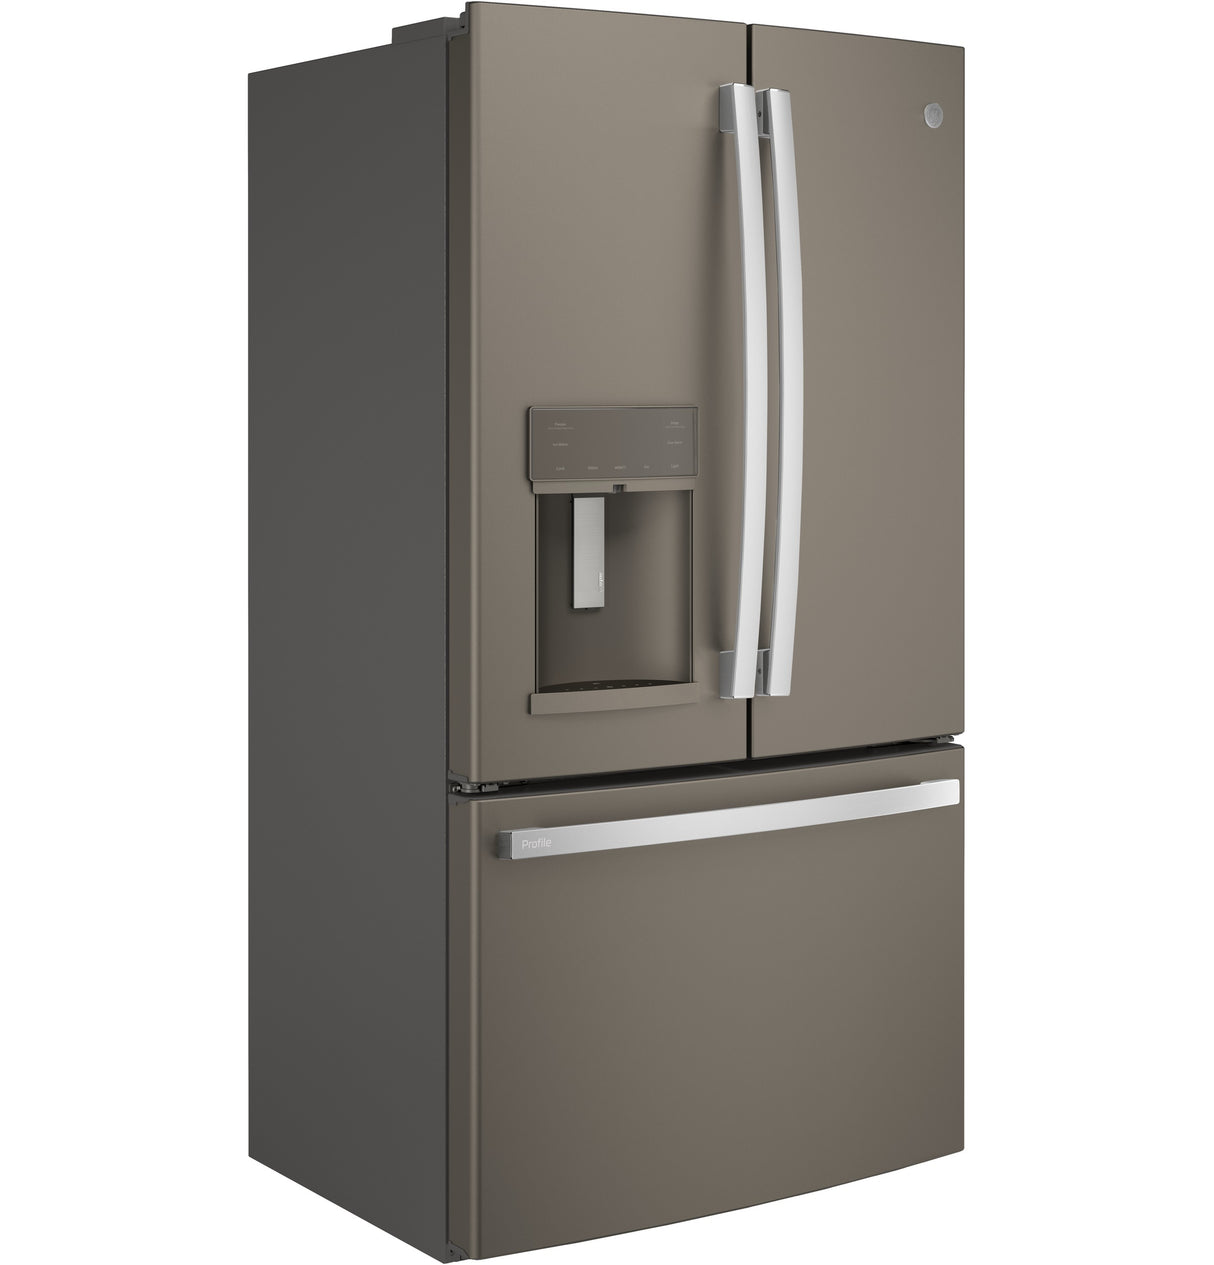 GE Profile(TM) Series ENERGY STAR(R) 22.1 Cu. Ft. Counter-Depth French-Door Refrigerator with Hands-Free AutoFill - (PYE22KMKES)